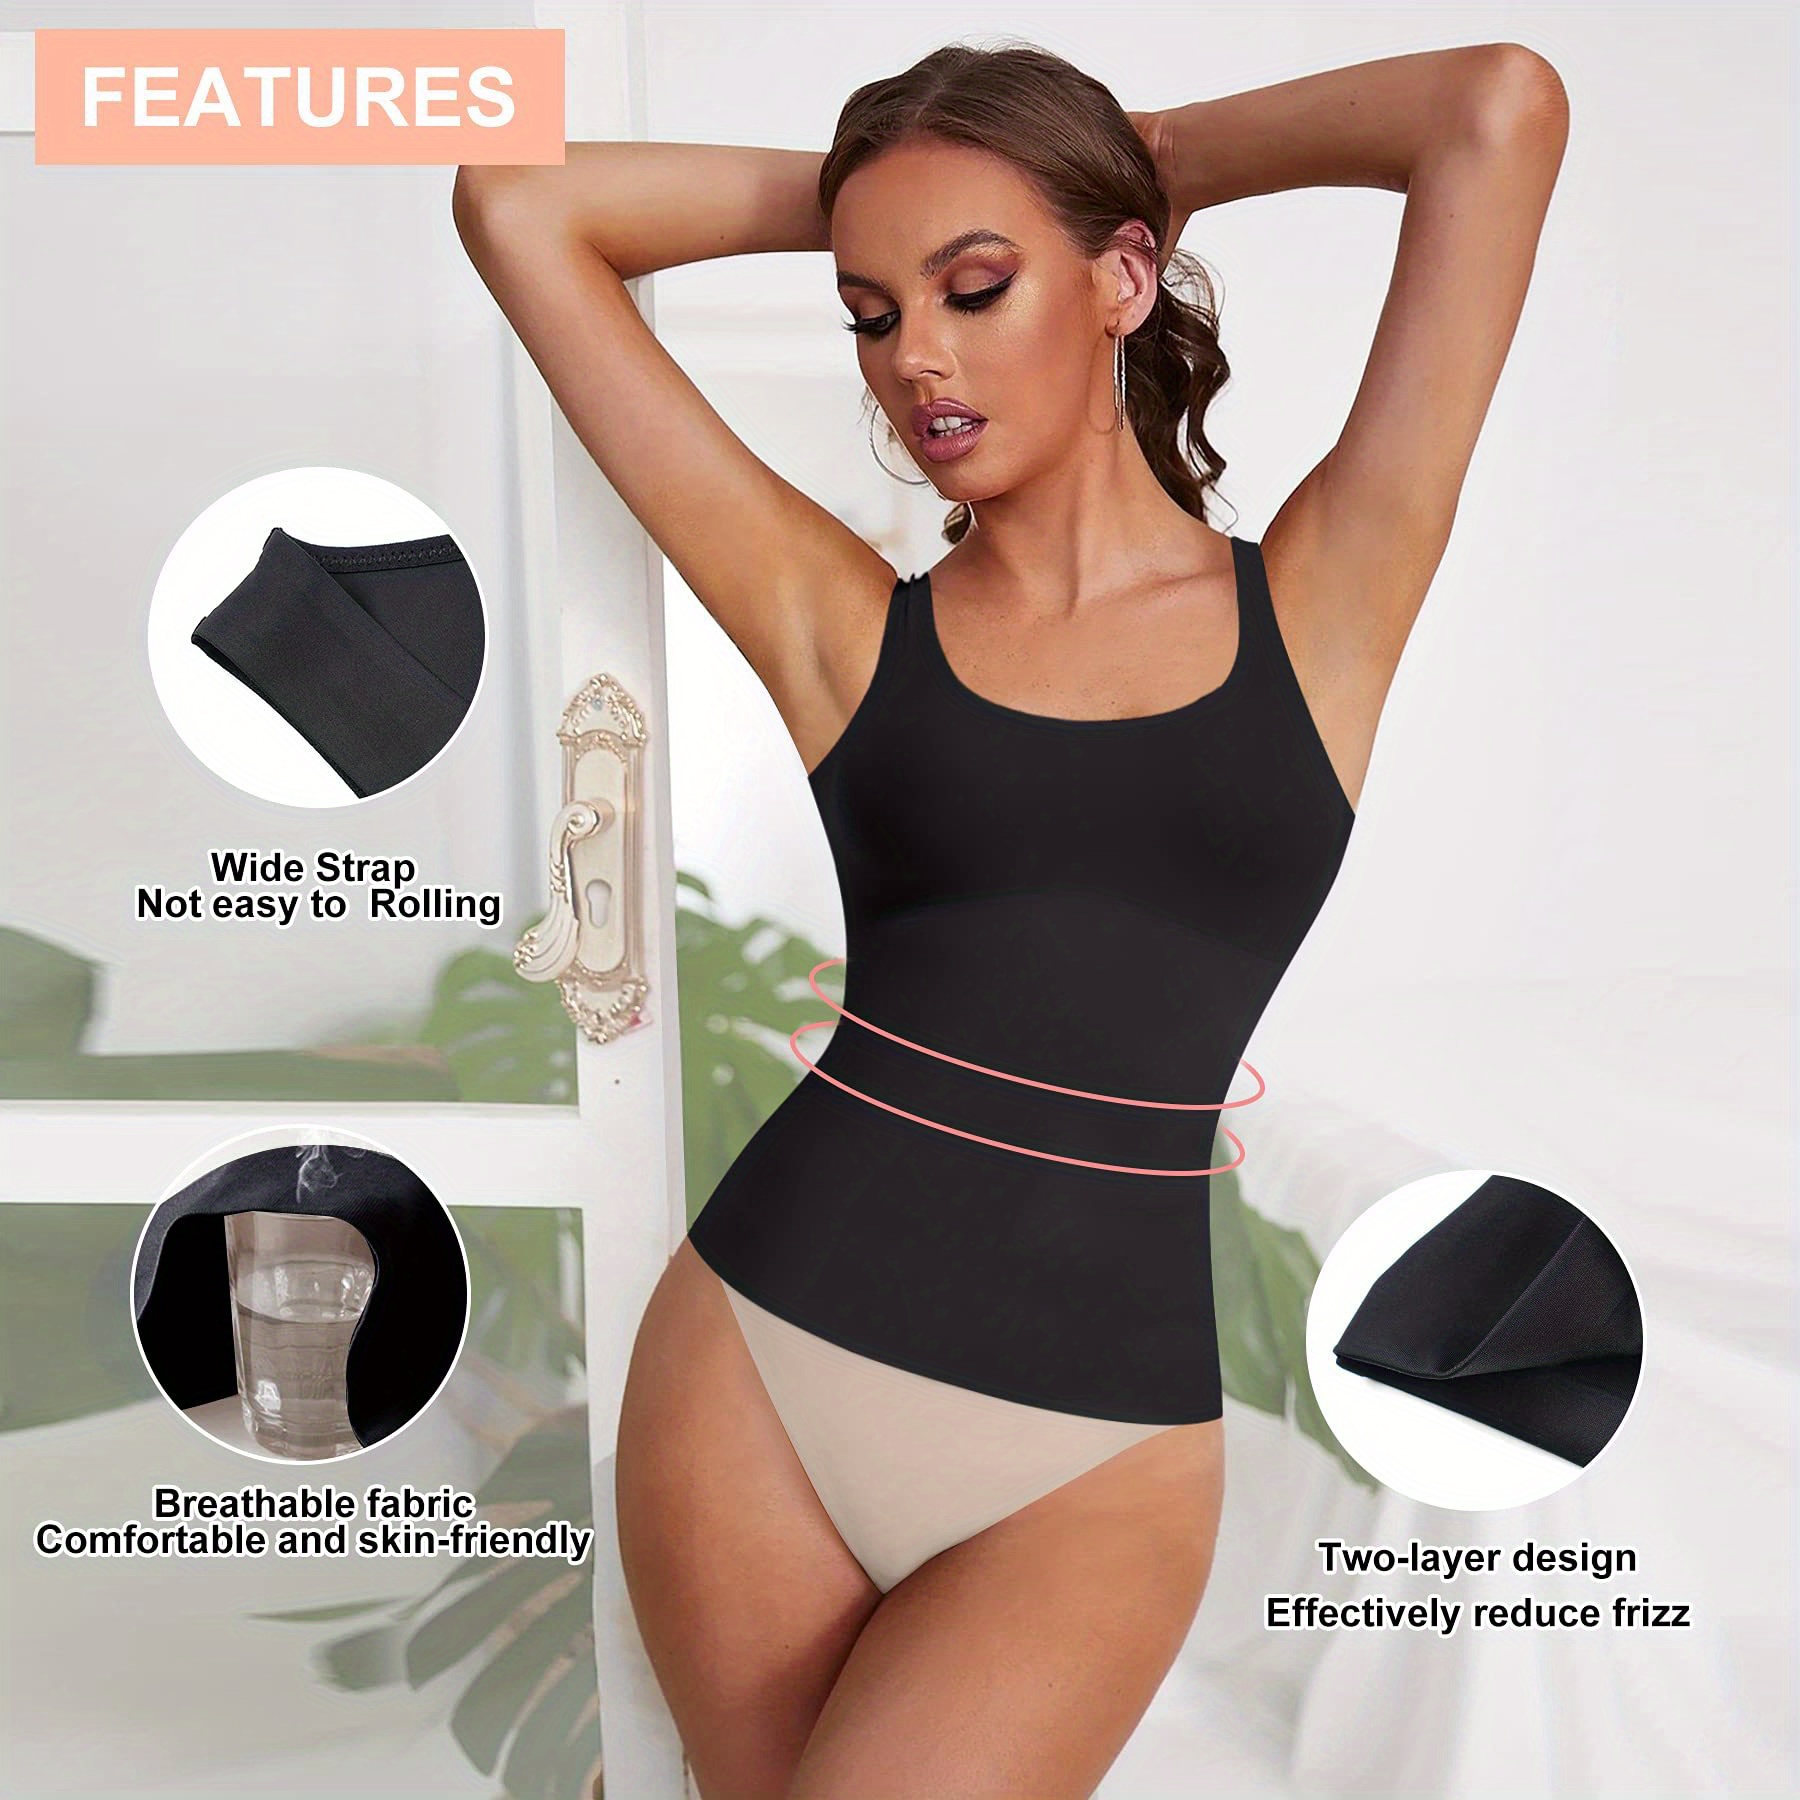 Seamless Waist Tummy Control Shapewear Top For Women Nude Black Camisole  With Compression Vest For Slimming Belly And Toning Summer Shapewear Tank  Top 230729 From Dang09, $7.44